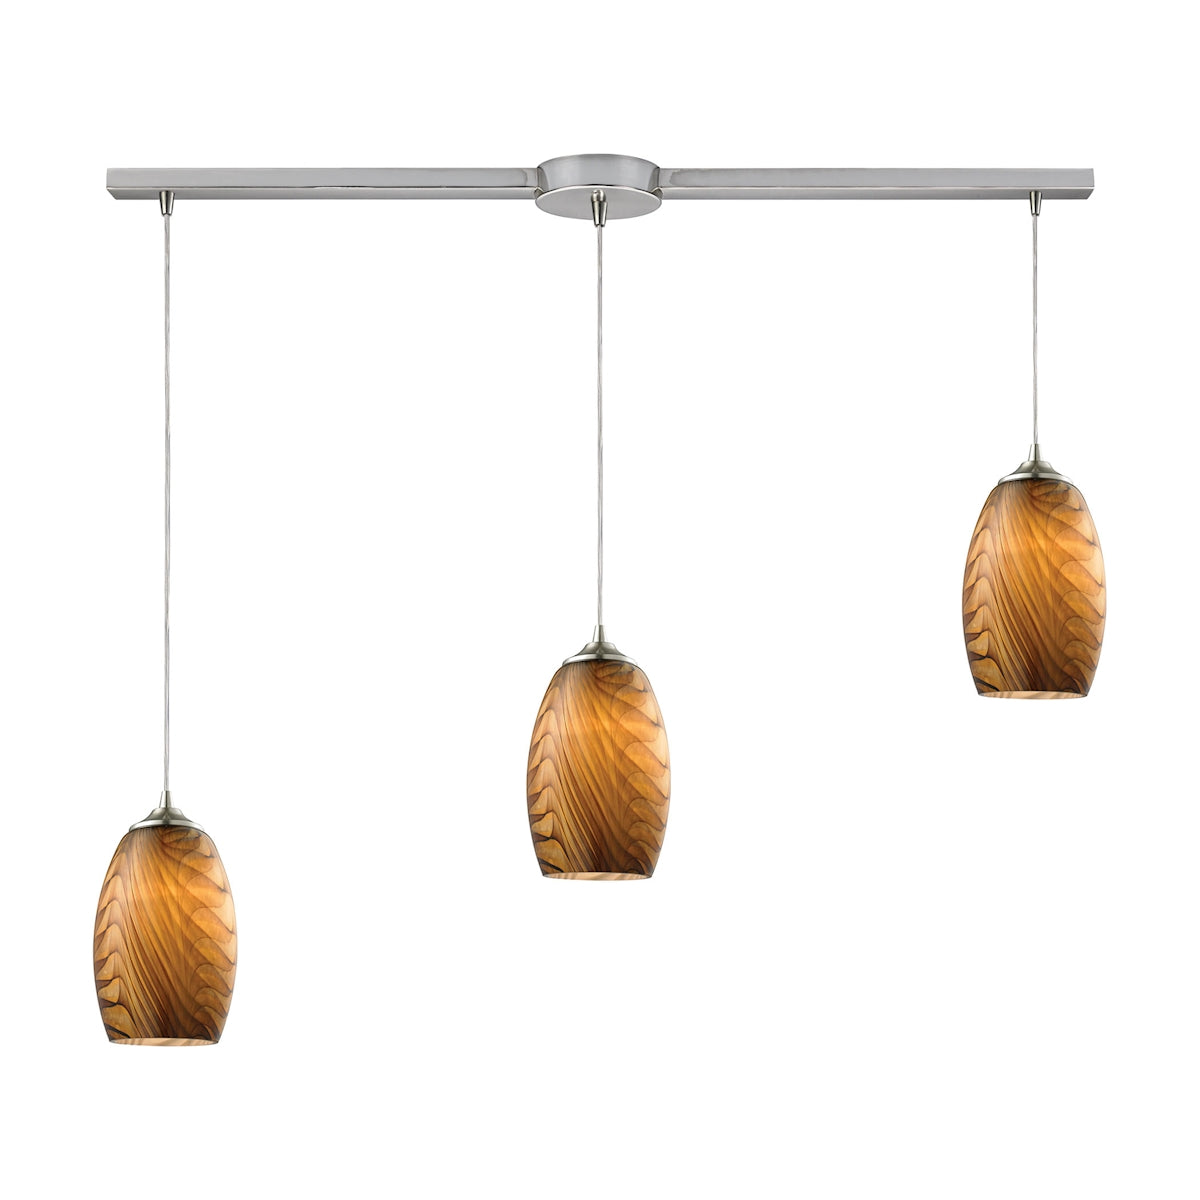 Tidewaters 3-Light Linear Pendant Fixture in Satin Nickel with Amber Glass